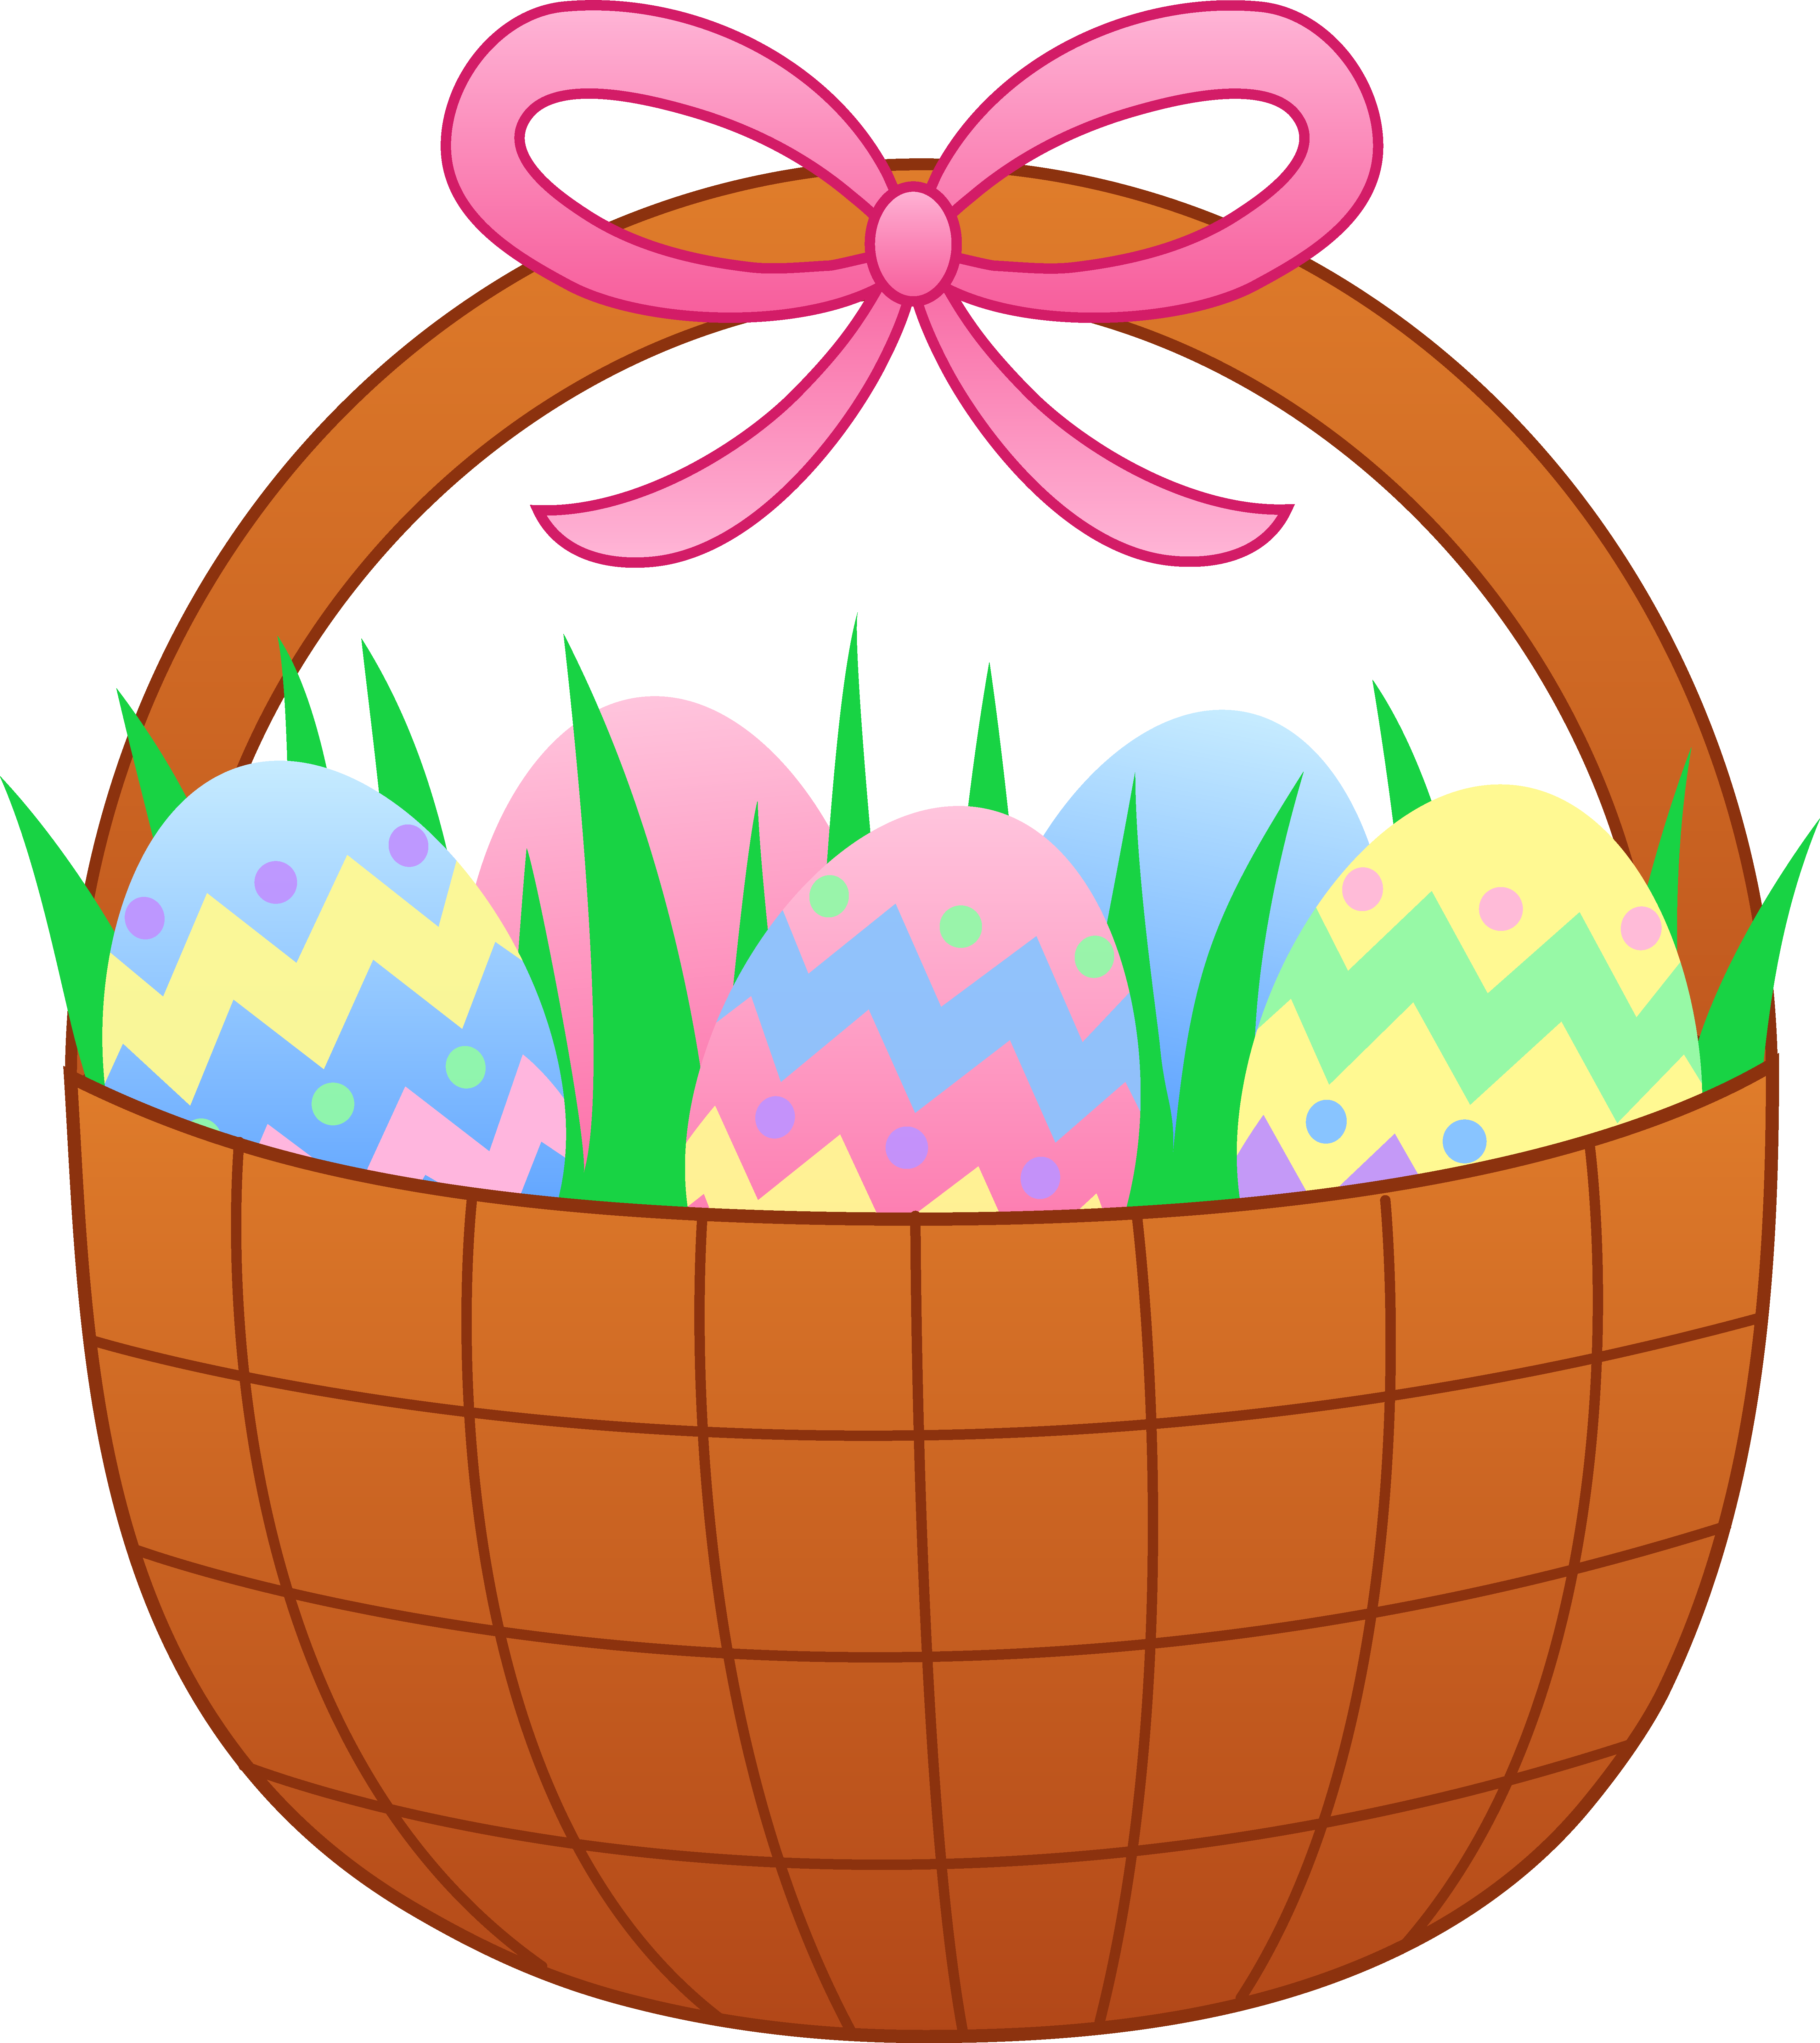 Easter Basket With Colorful Eggs - Free Clip Art